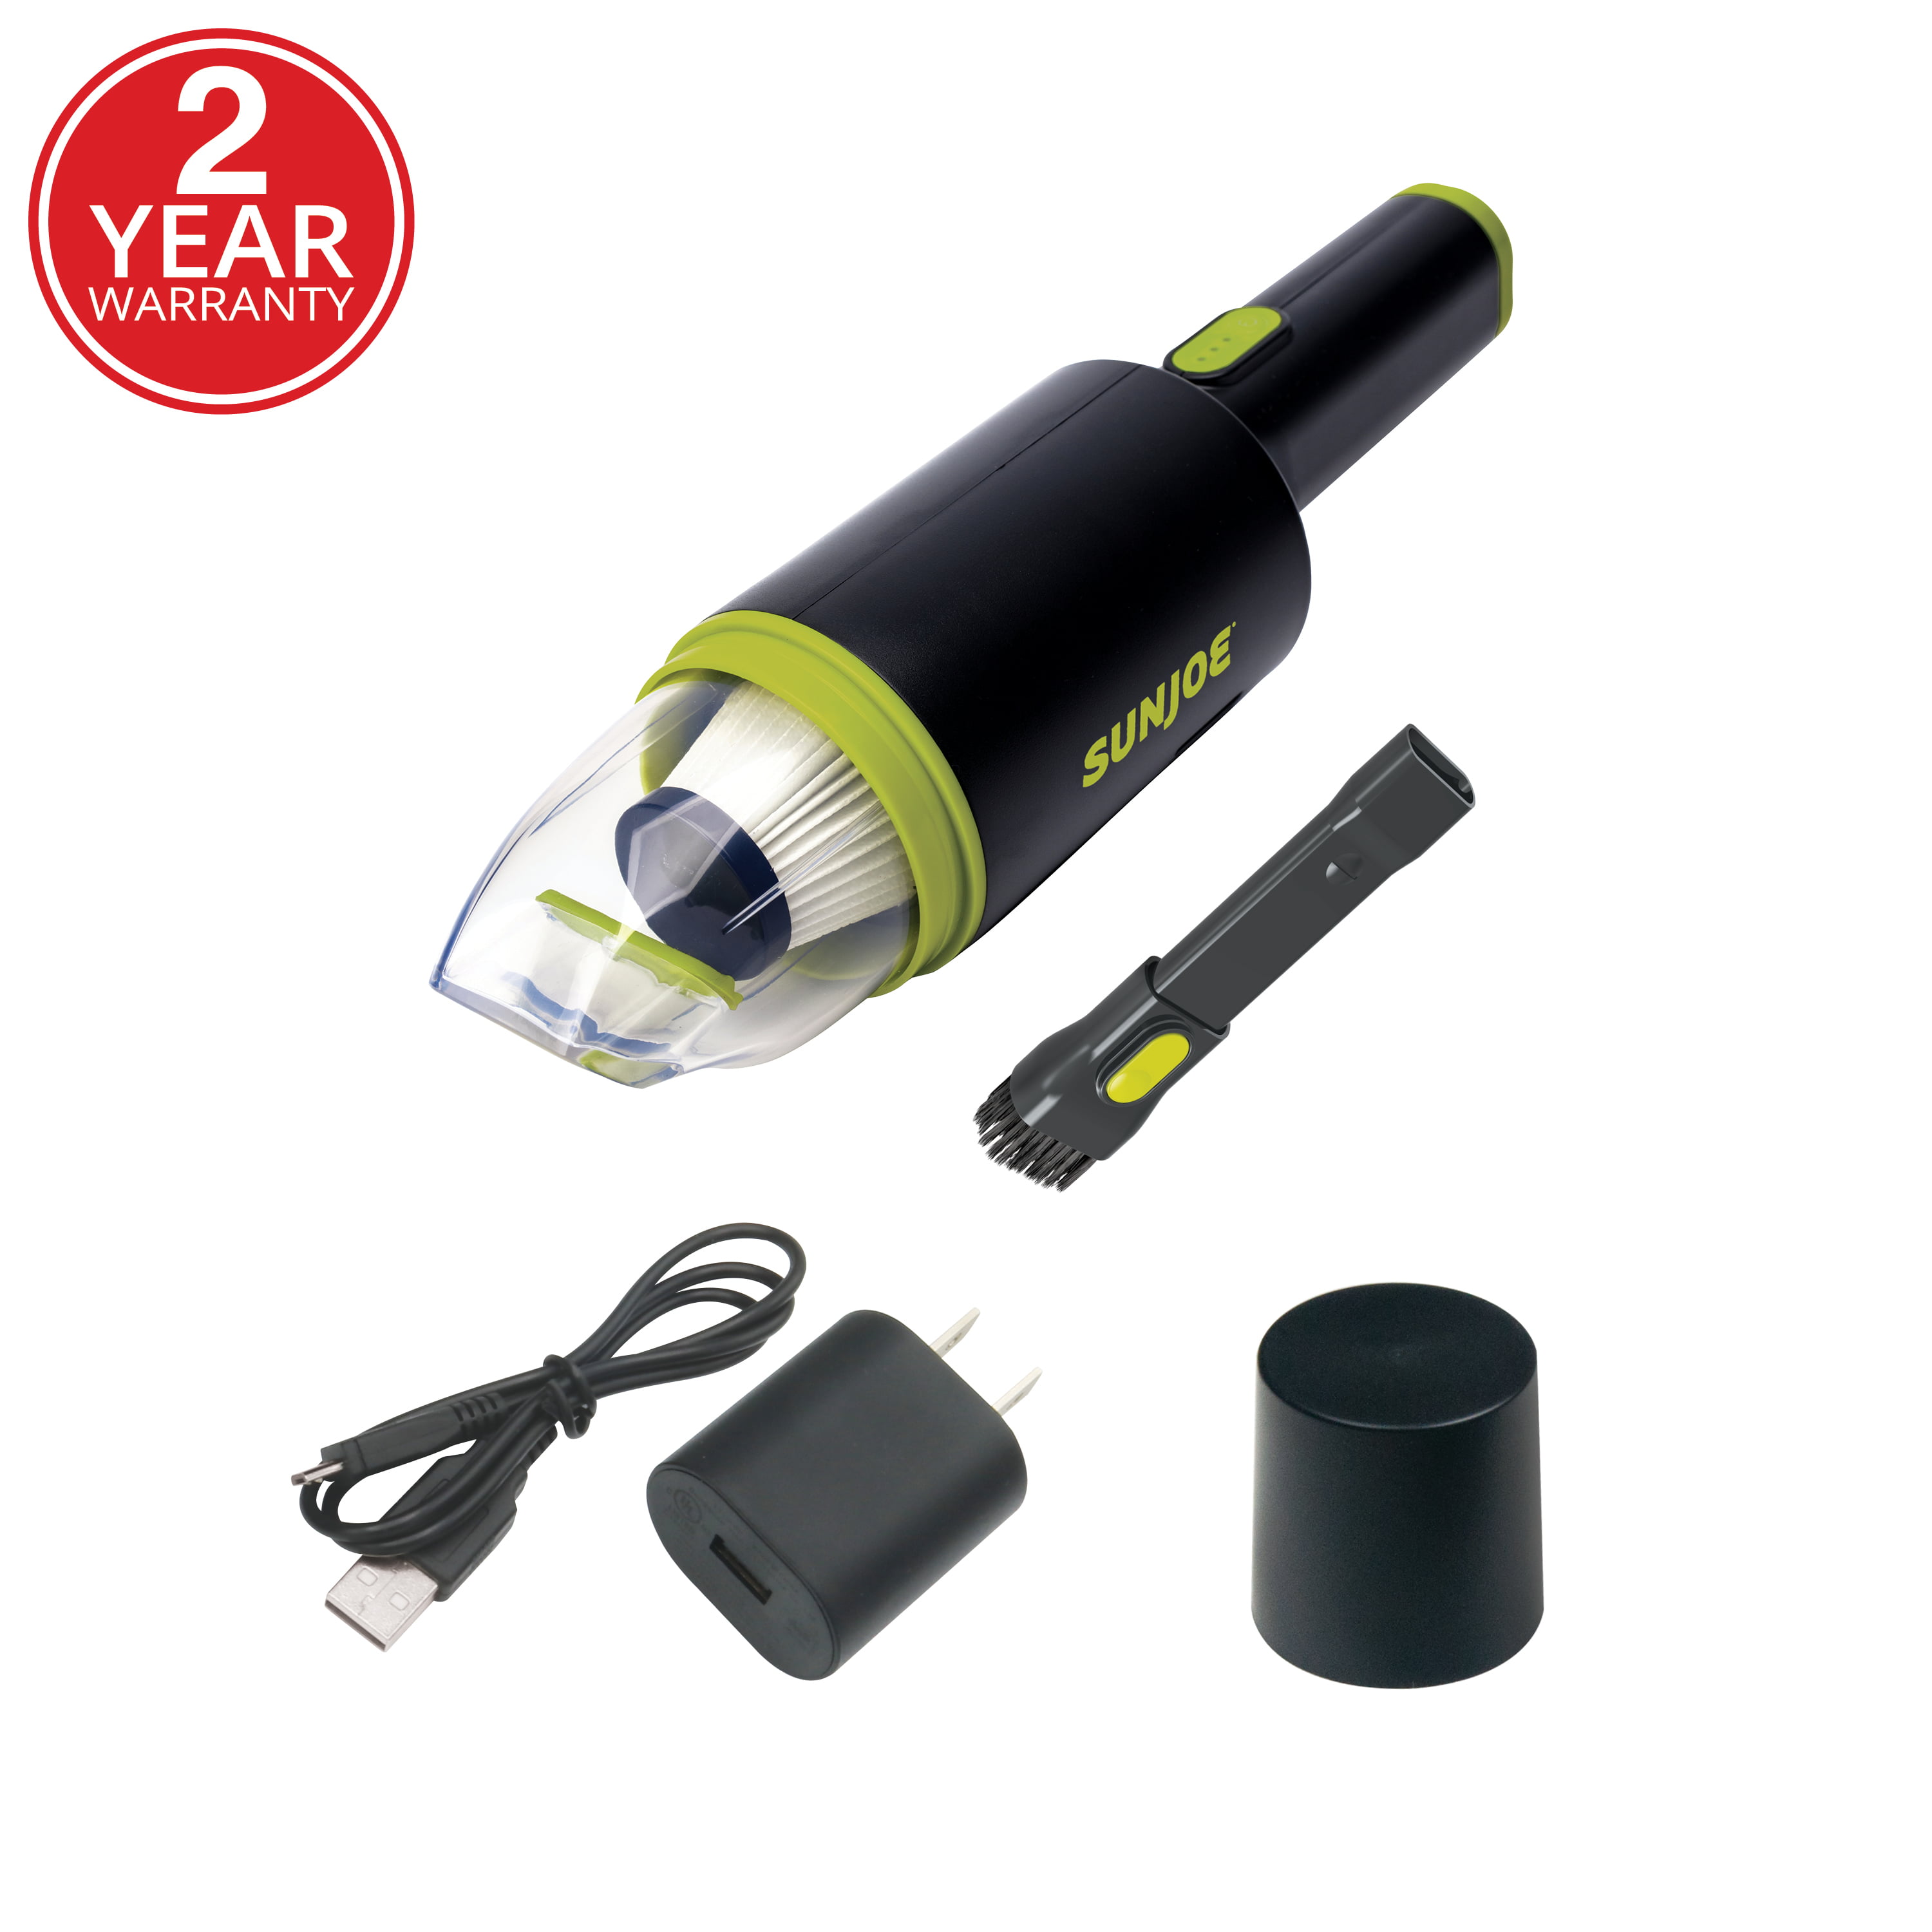 Sun Joe AJV1000 Cordless Handheld Vacuum Cleaner, Ultra-Lightweight, HEPA Filtration EZ Clear Collection Bin, USB Charging Block and Cable Included, For Home, Auto and RVs - Walmart.com